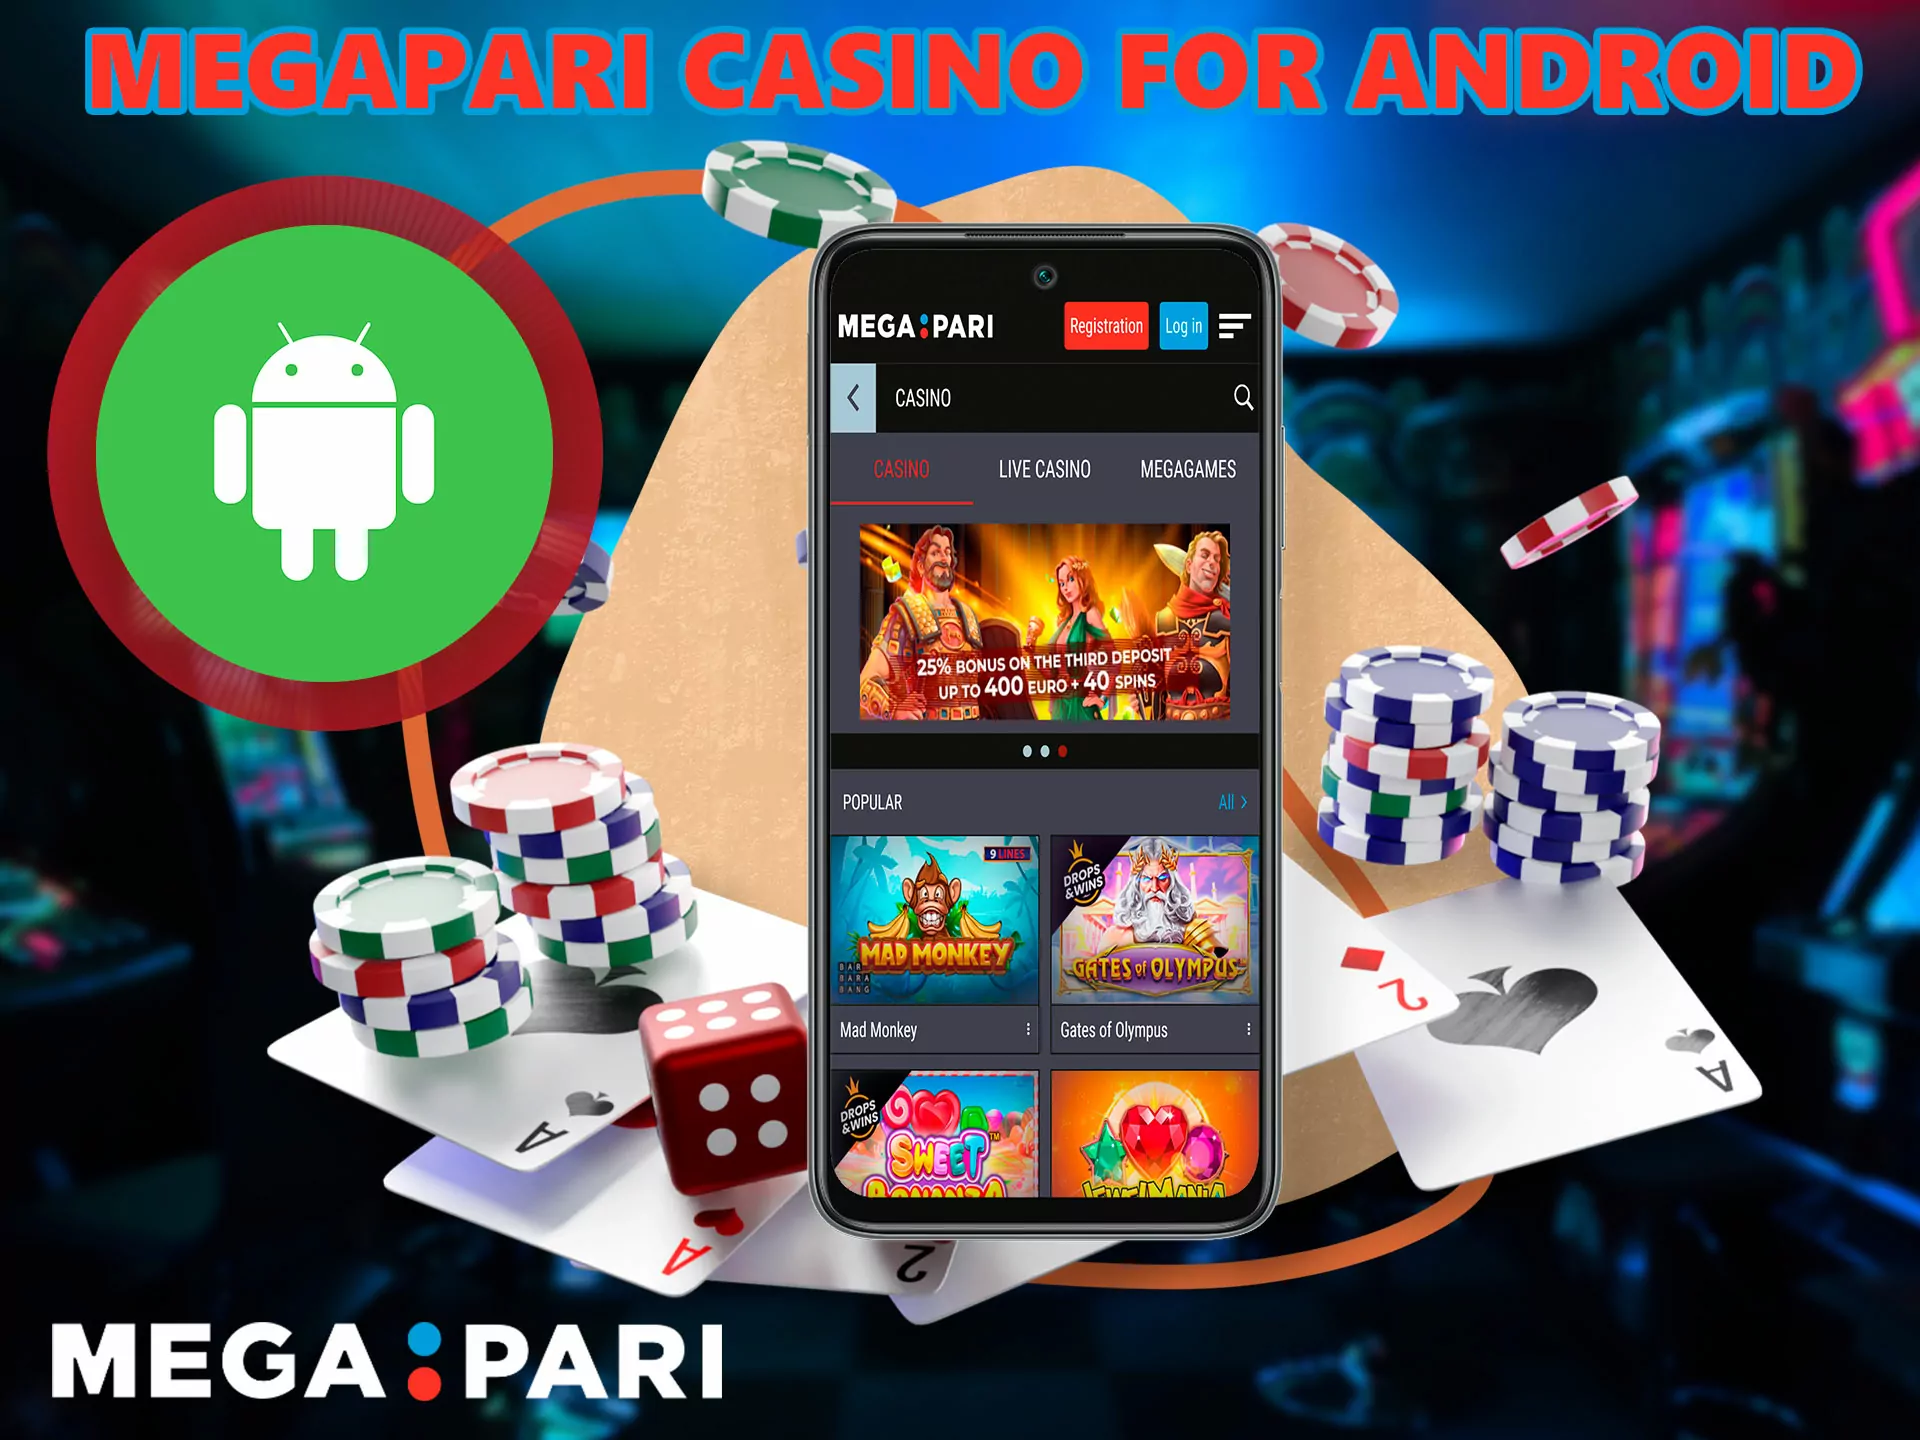 Unfortunately, the process of obtaining an application for gambling in a casino is not so simple, you need to download the apk file from the official site and start the installation.